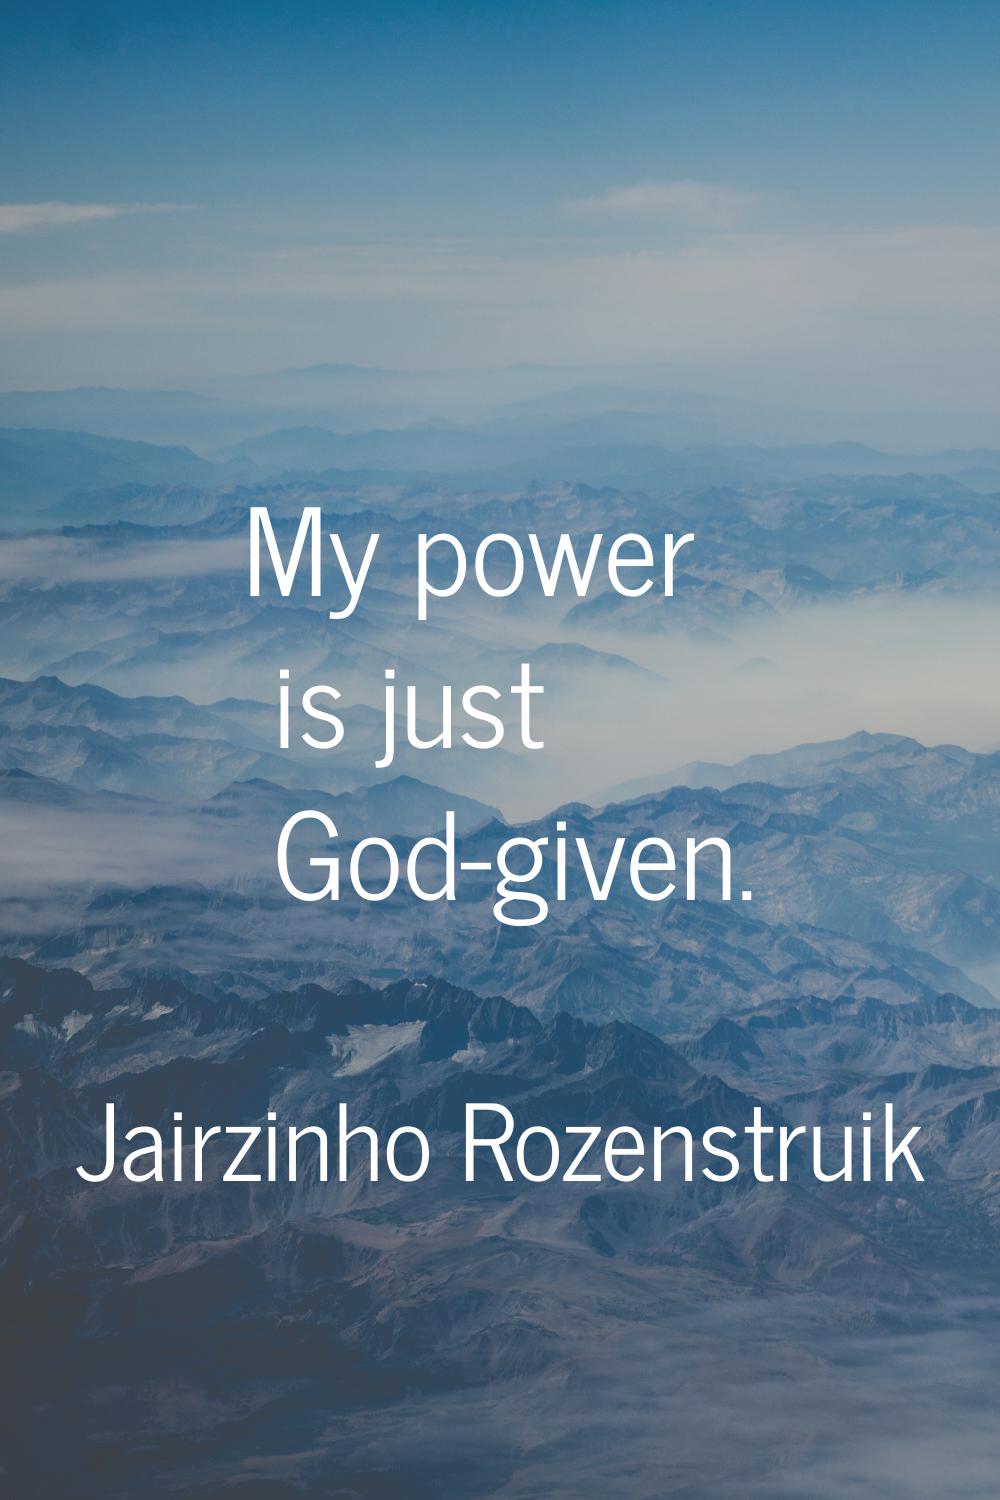 My power is just God-given.